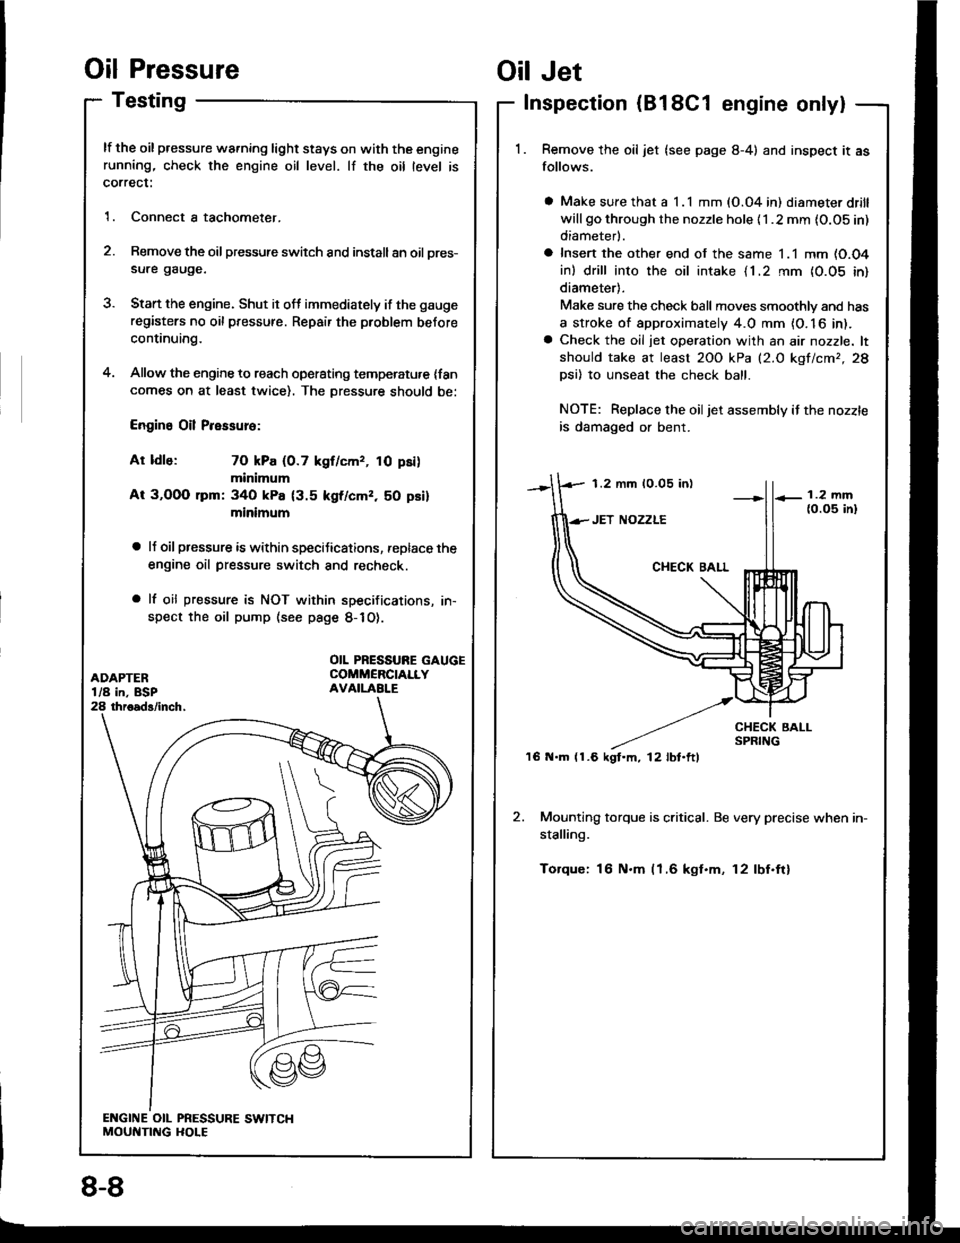 ACURA INTEGRA 1994  Service Repair Manual Oil Pressure
Testing
lf the oil pressure warning light stays on with the enginerunning, check the engine oil level. lf the oil level is
correct:
1. Connect a tachometer.
2. Remove the oil pressure swi